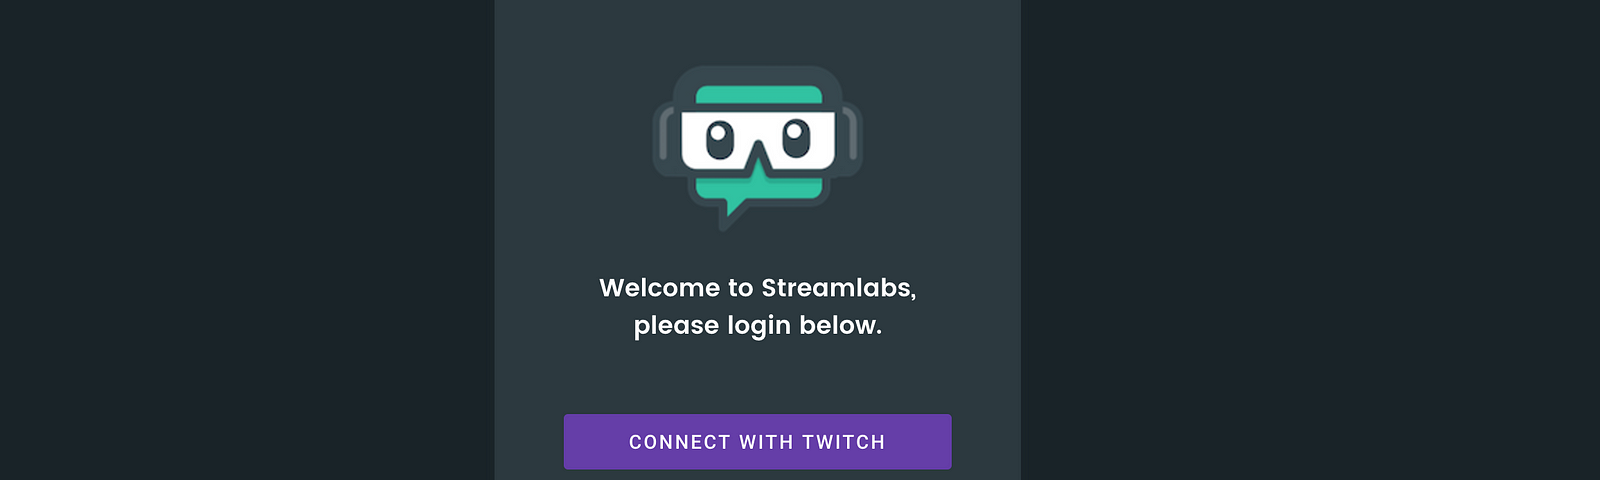 streamlabs for xbox